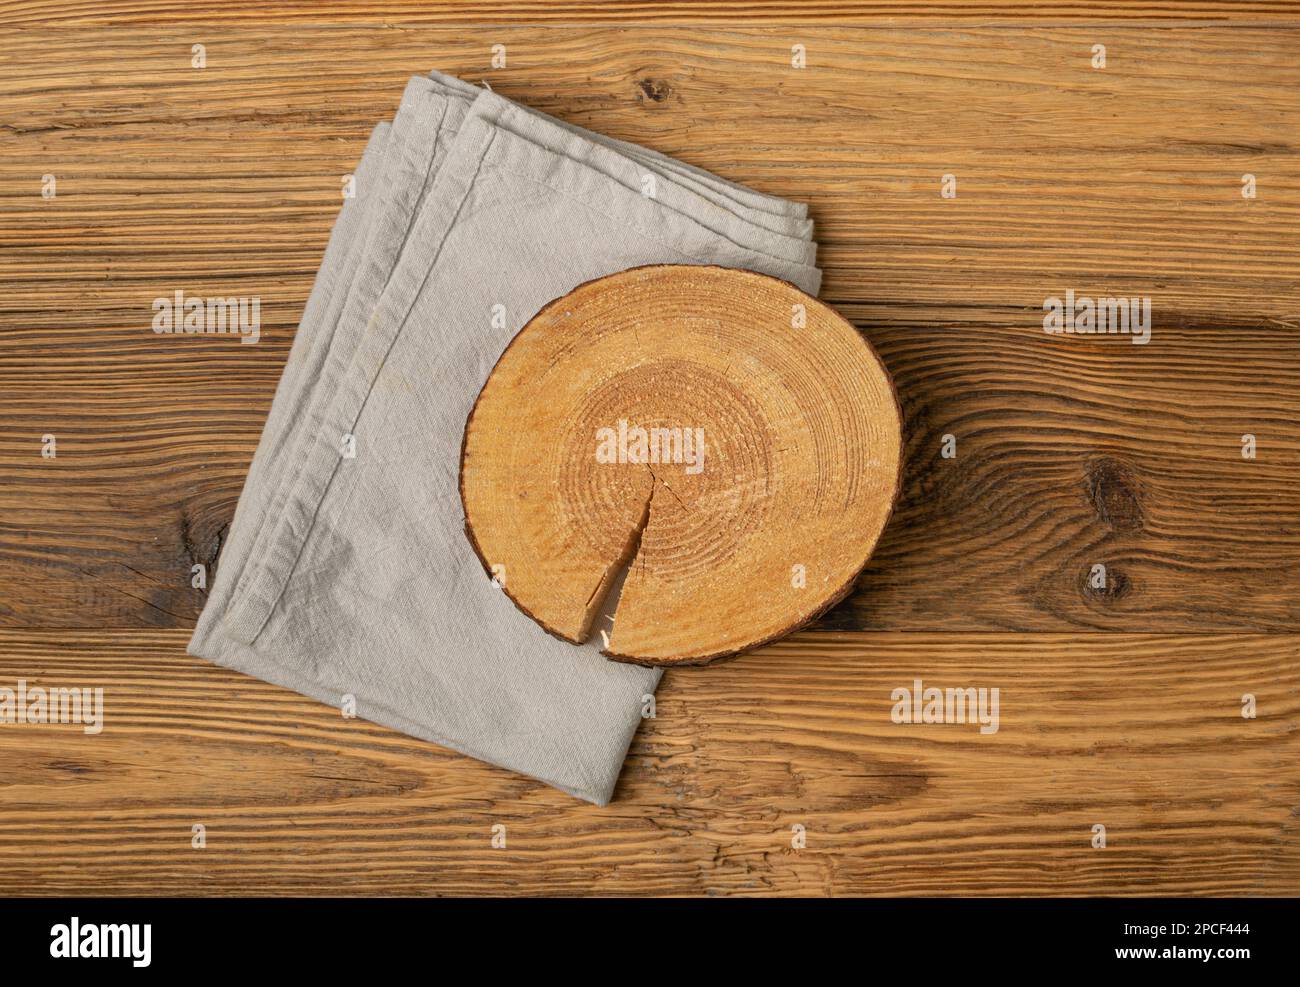 Old wood cutting board mockup with a vintage chopping board